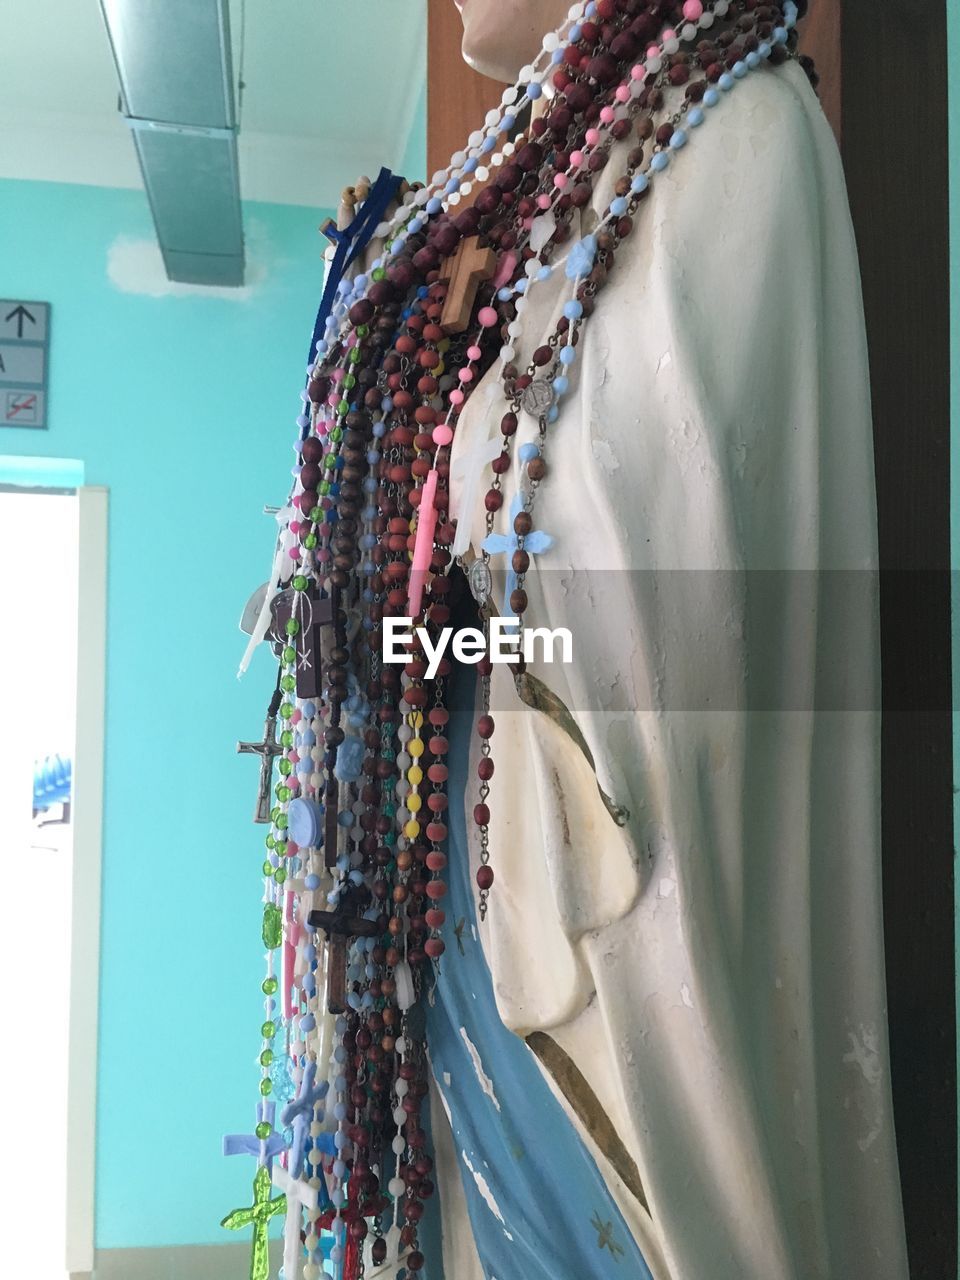 CLOSE-UP OF CLOTHES HANGING ON WALL